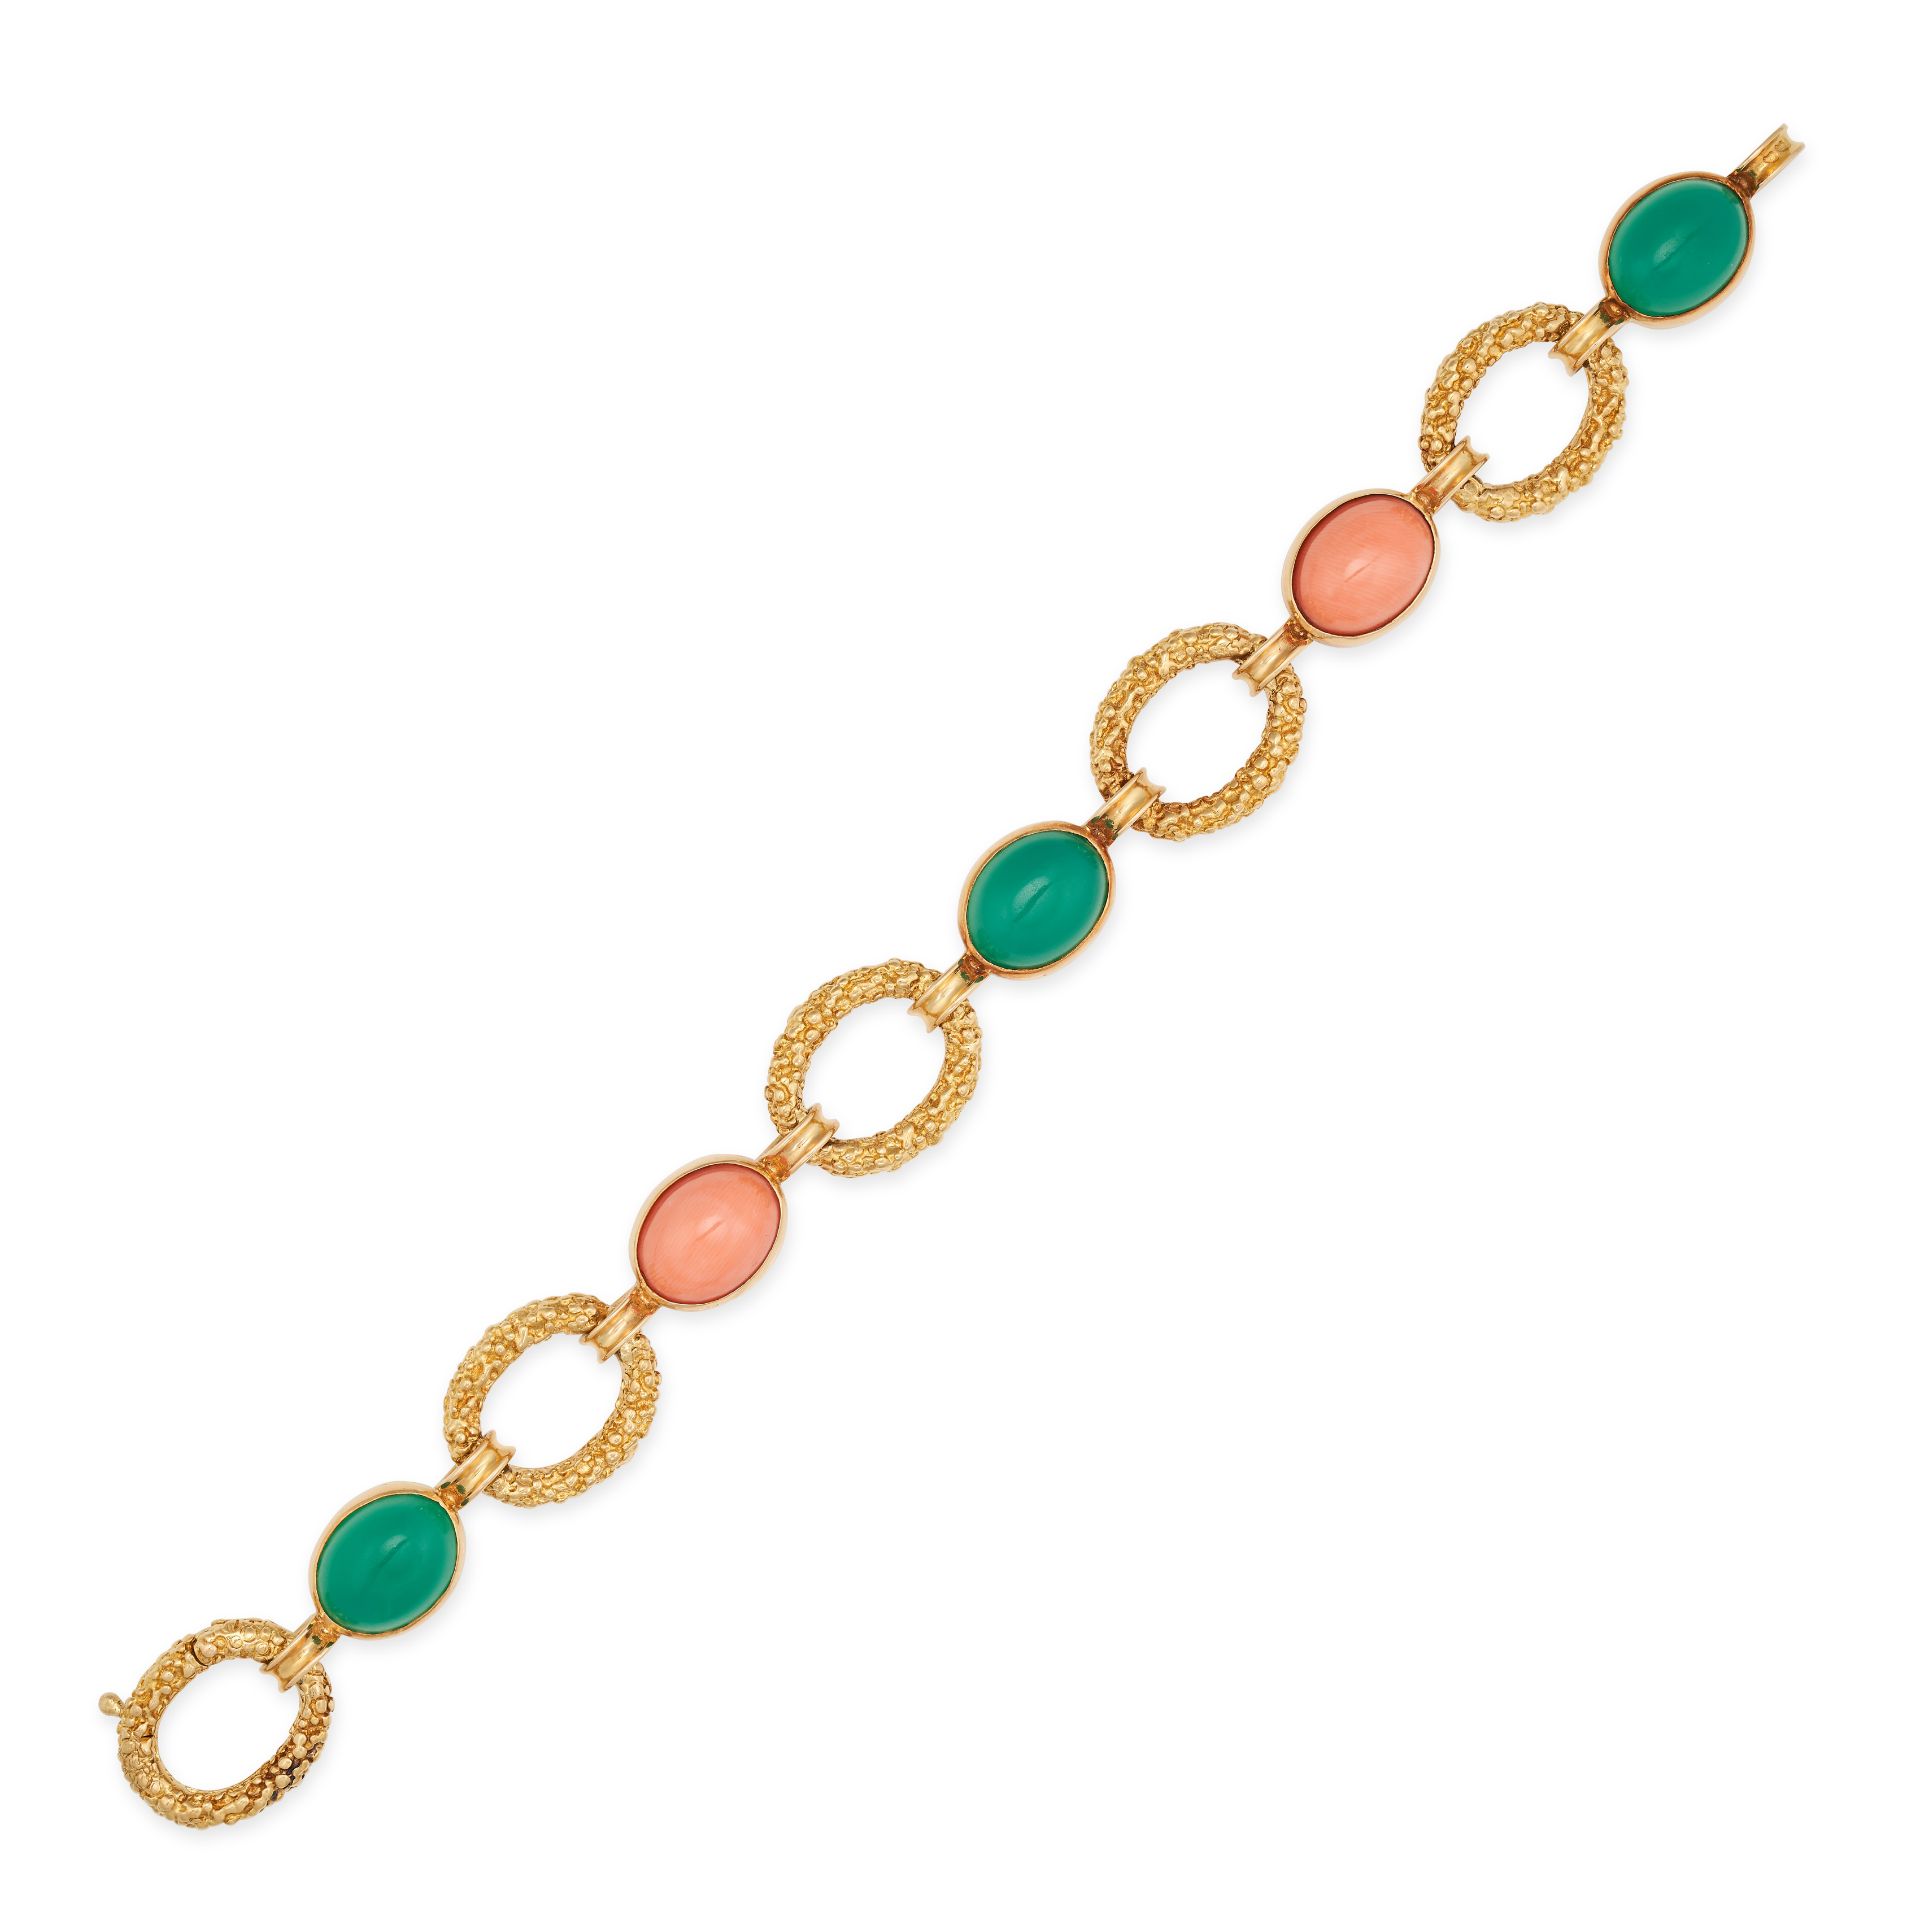 VAN CLEEF & ARPELS, A VINTAGE CORAL AND CHRYSOPRASE BRACELET in 18ct yellow gold, comprising a ro...